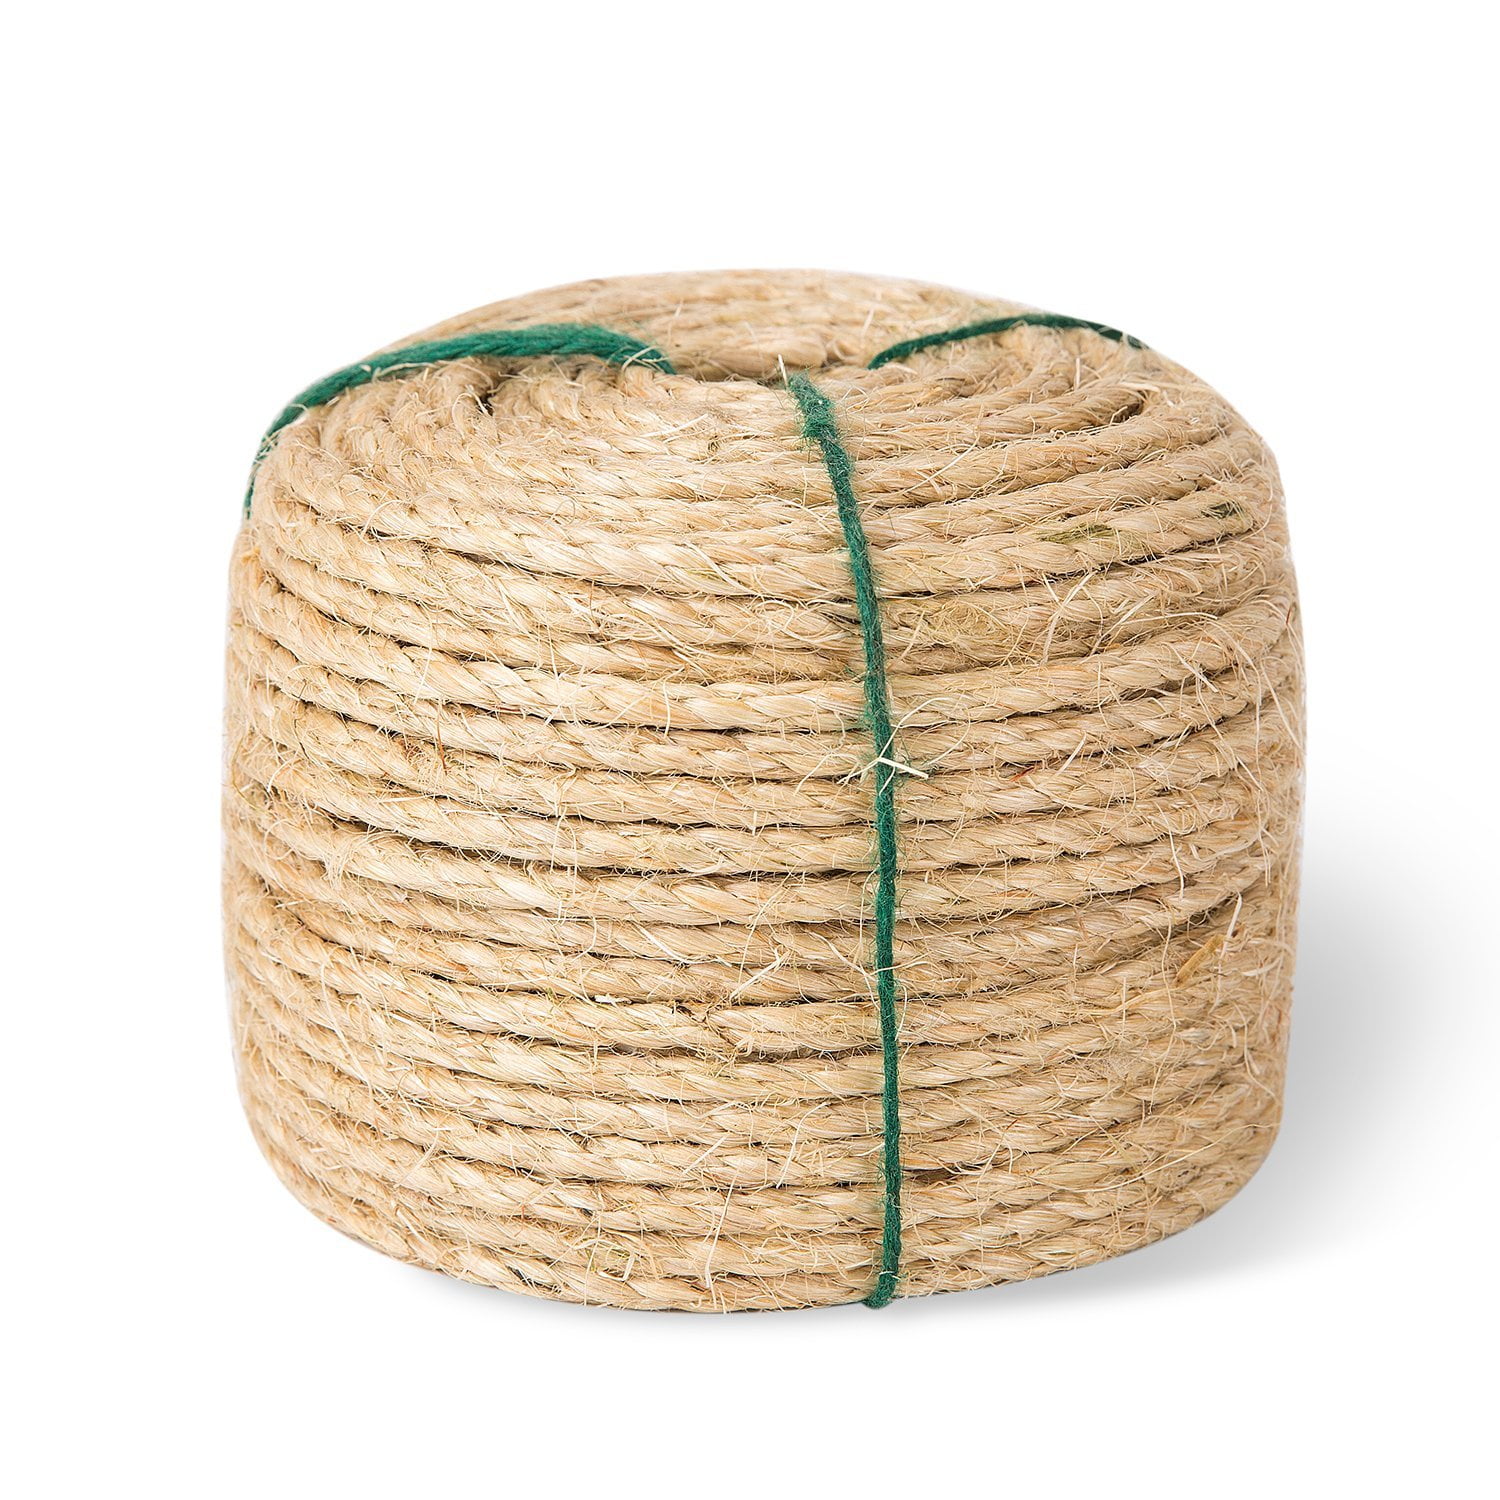 Details about   Sisal Rope 100% Natural Fiber Decorative Cat Scratch Pets Birds Arts And Crafts 